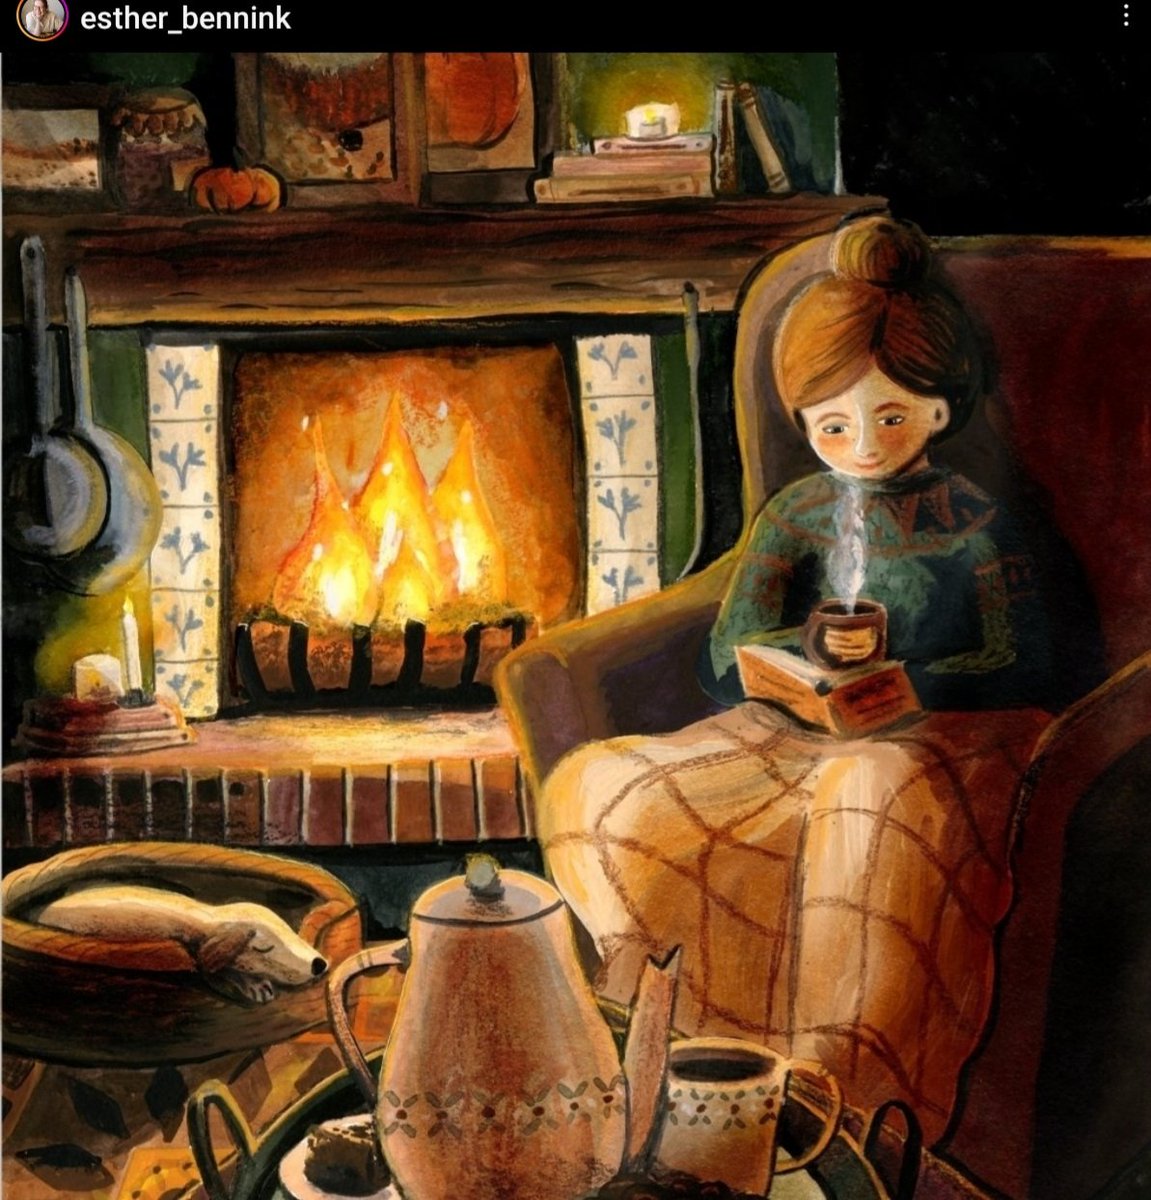 Summer hadn't started yet🤭but I'm longing for winter to enjoy nights like these: A cosy night with your dog curled up by the beautifully warm fire, a good book & a cup of hot chocolate 💕life doesn't get much better💕
#Cosy #Reading #Home #warmFire #HomeSweetHome #Jo_March62